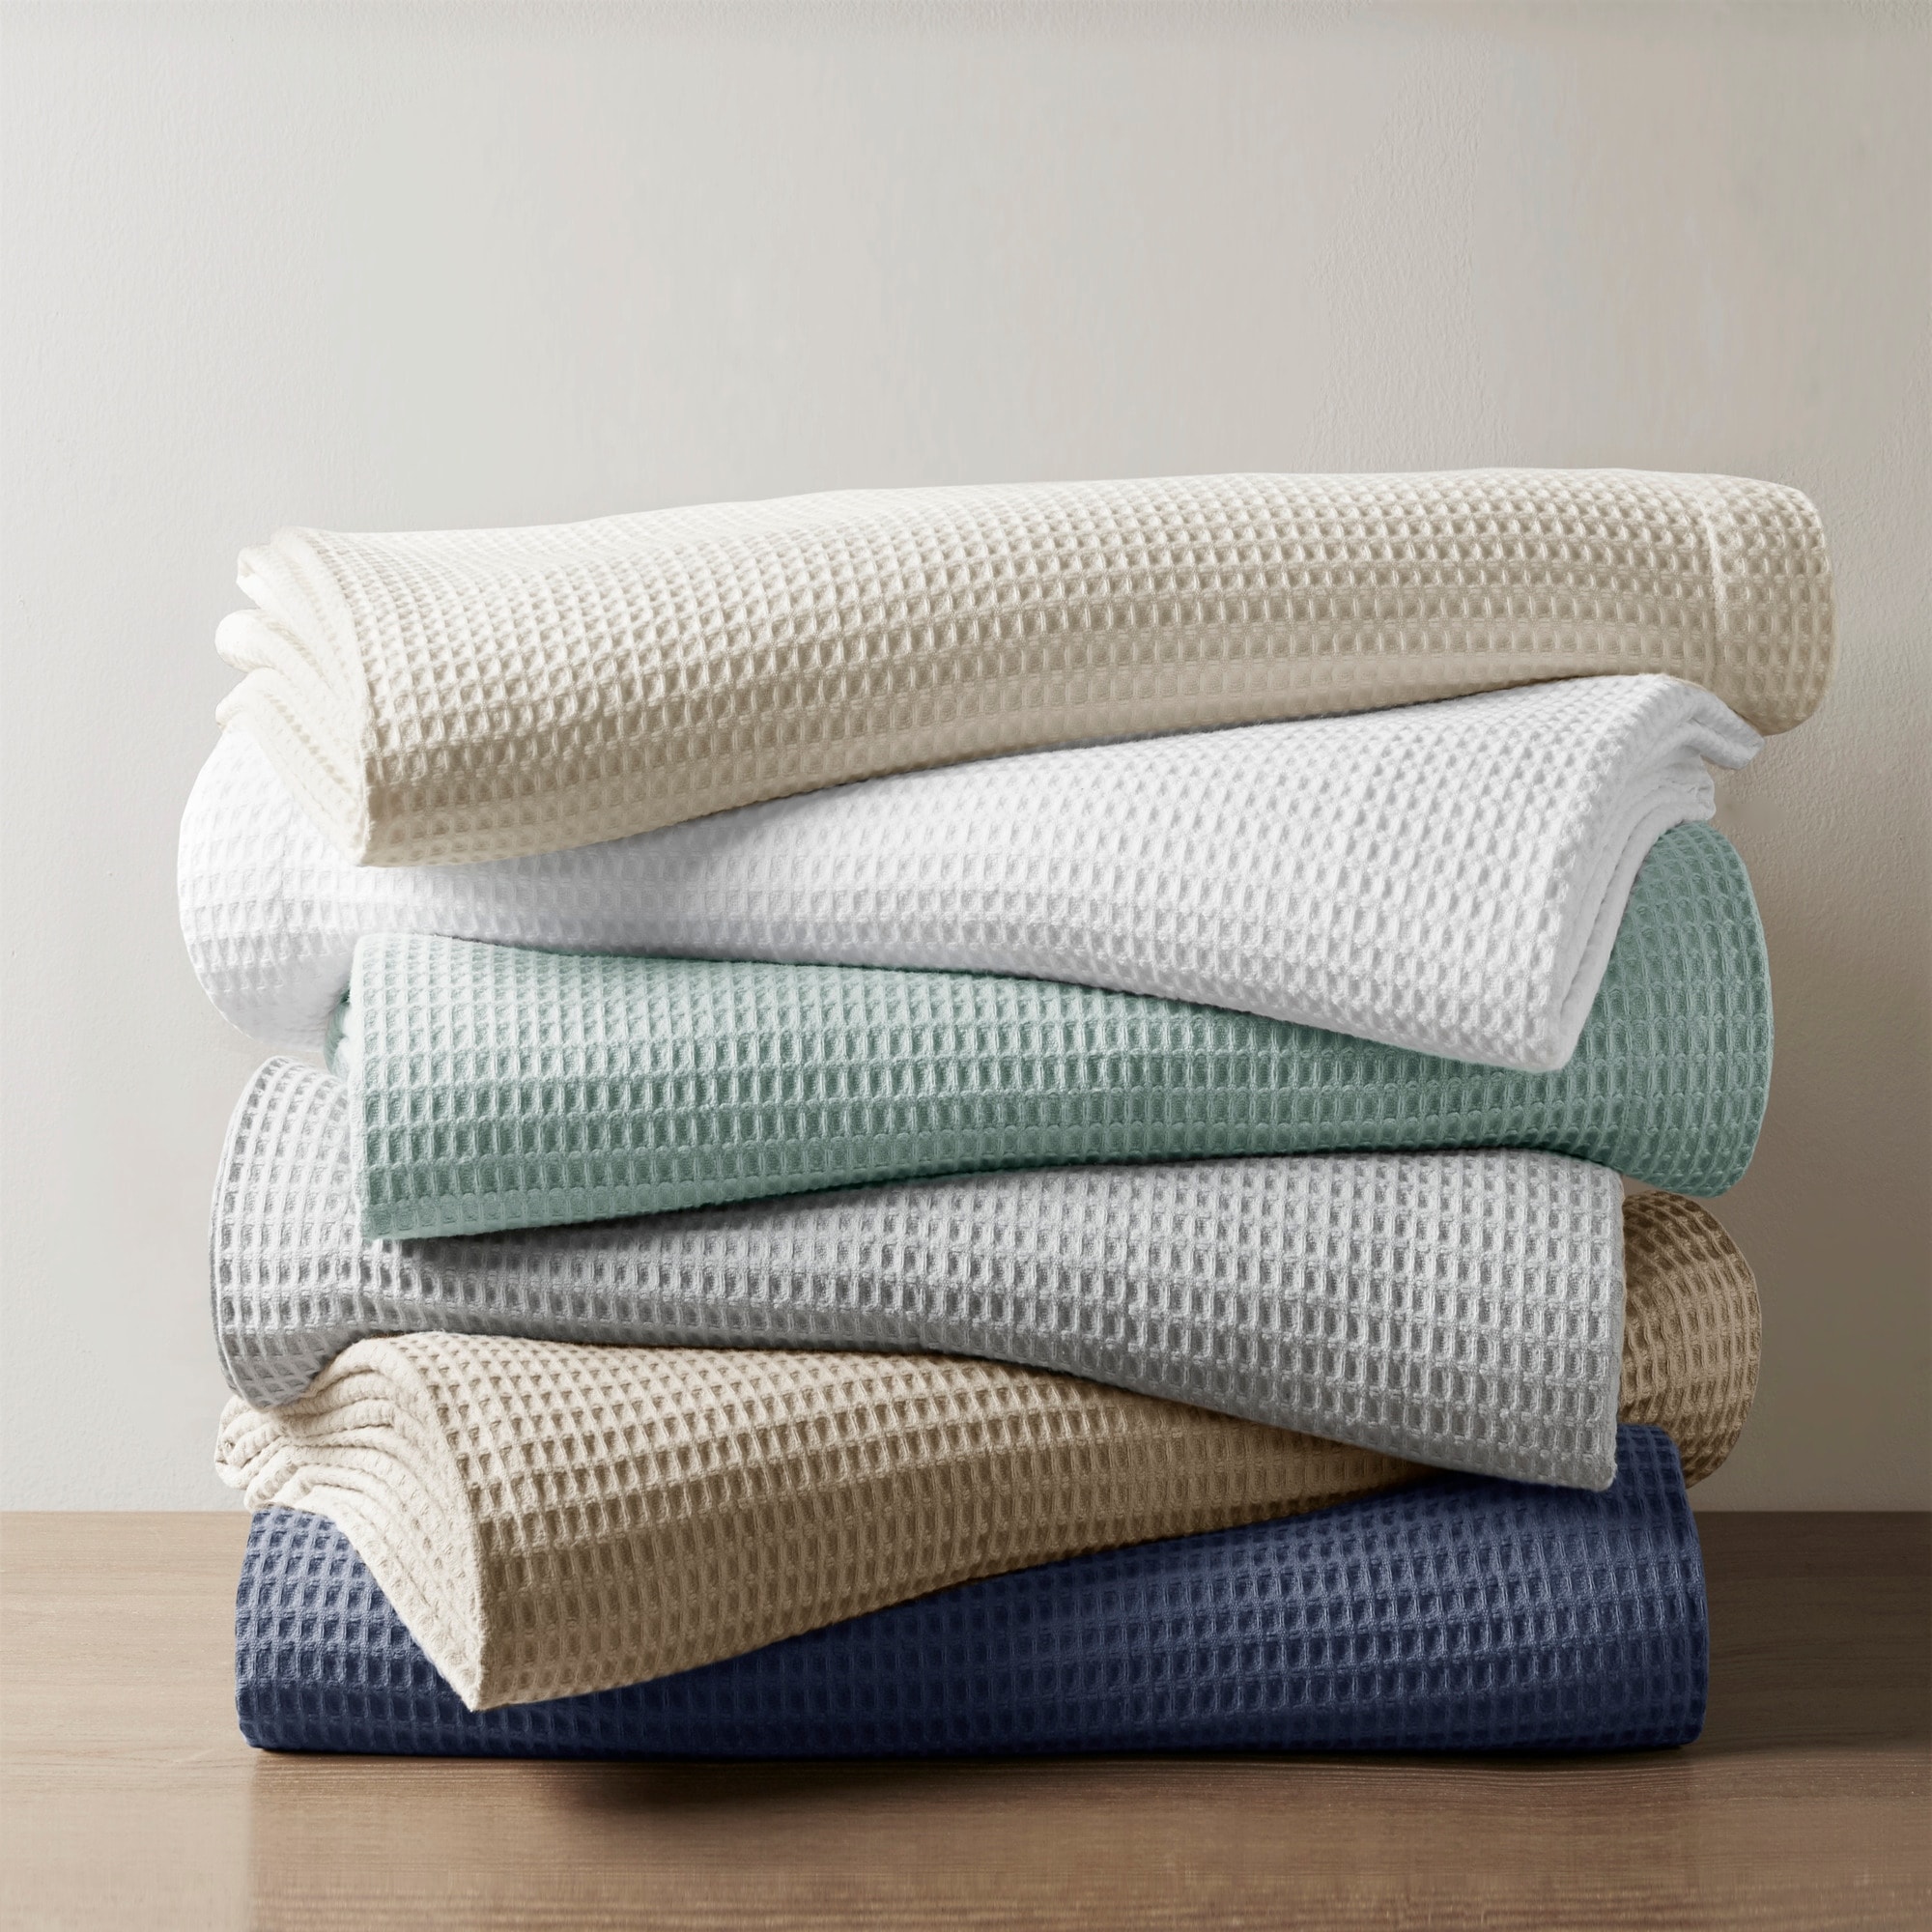 https://ak1.ostkcdn.com/images/products/is/images/direct/31a22ca1a9c8a8f63b5d28692036b8c0907bc8e1/Beautyrest-Waffle-Weave-Cotton-Blanket.jpg